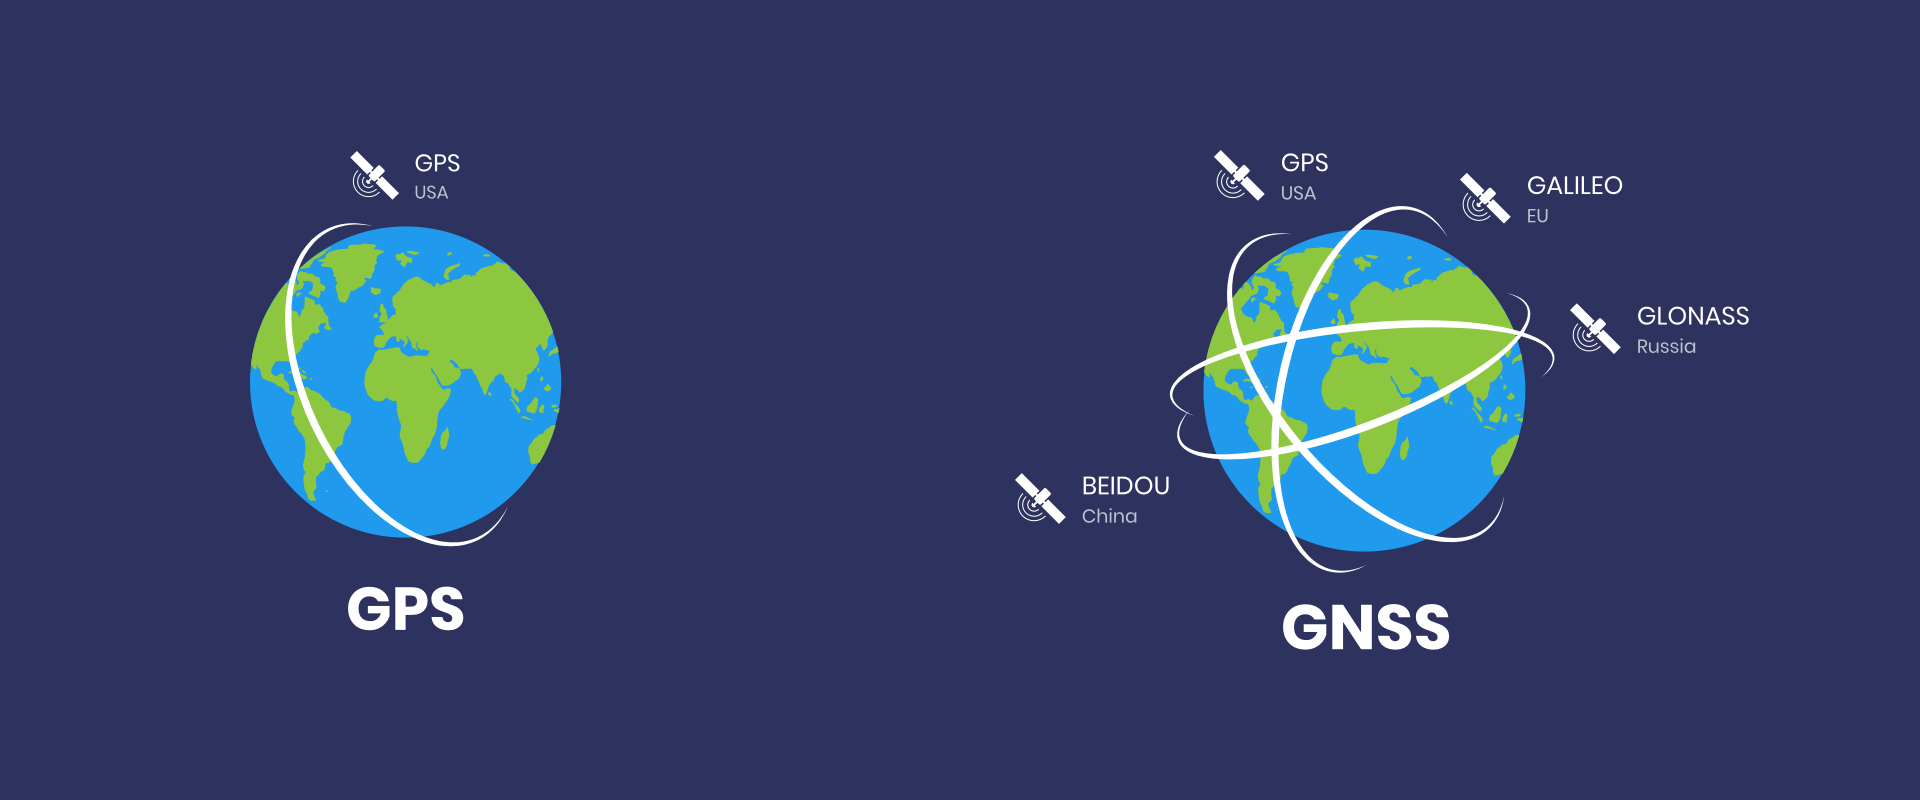 What is the Difference Between GNSS and GPS receivers